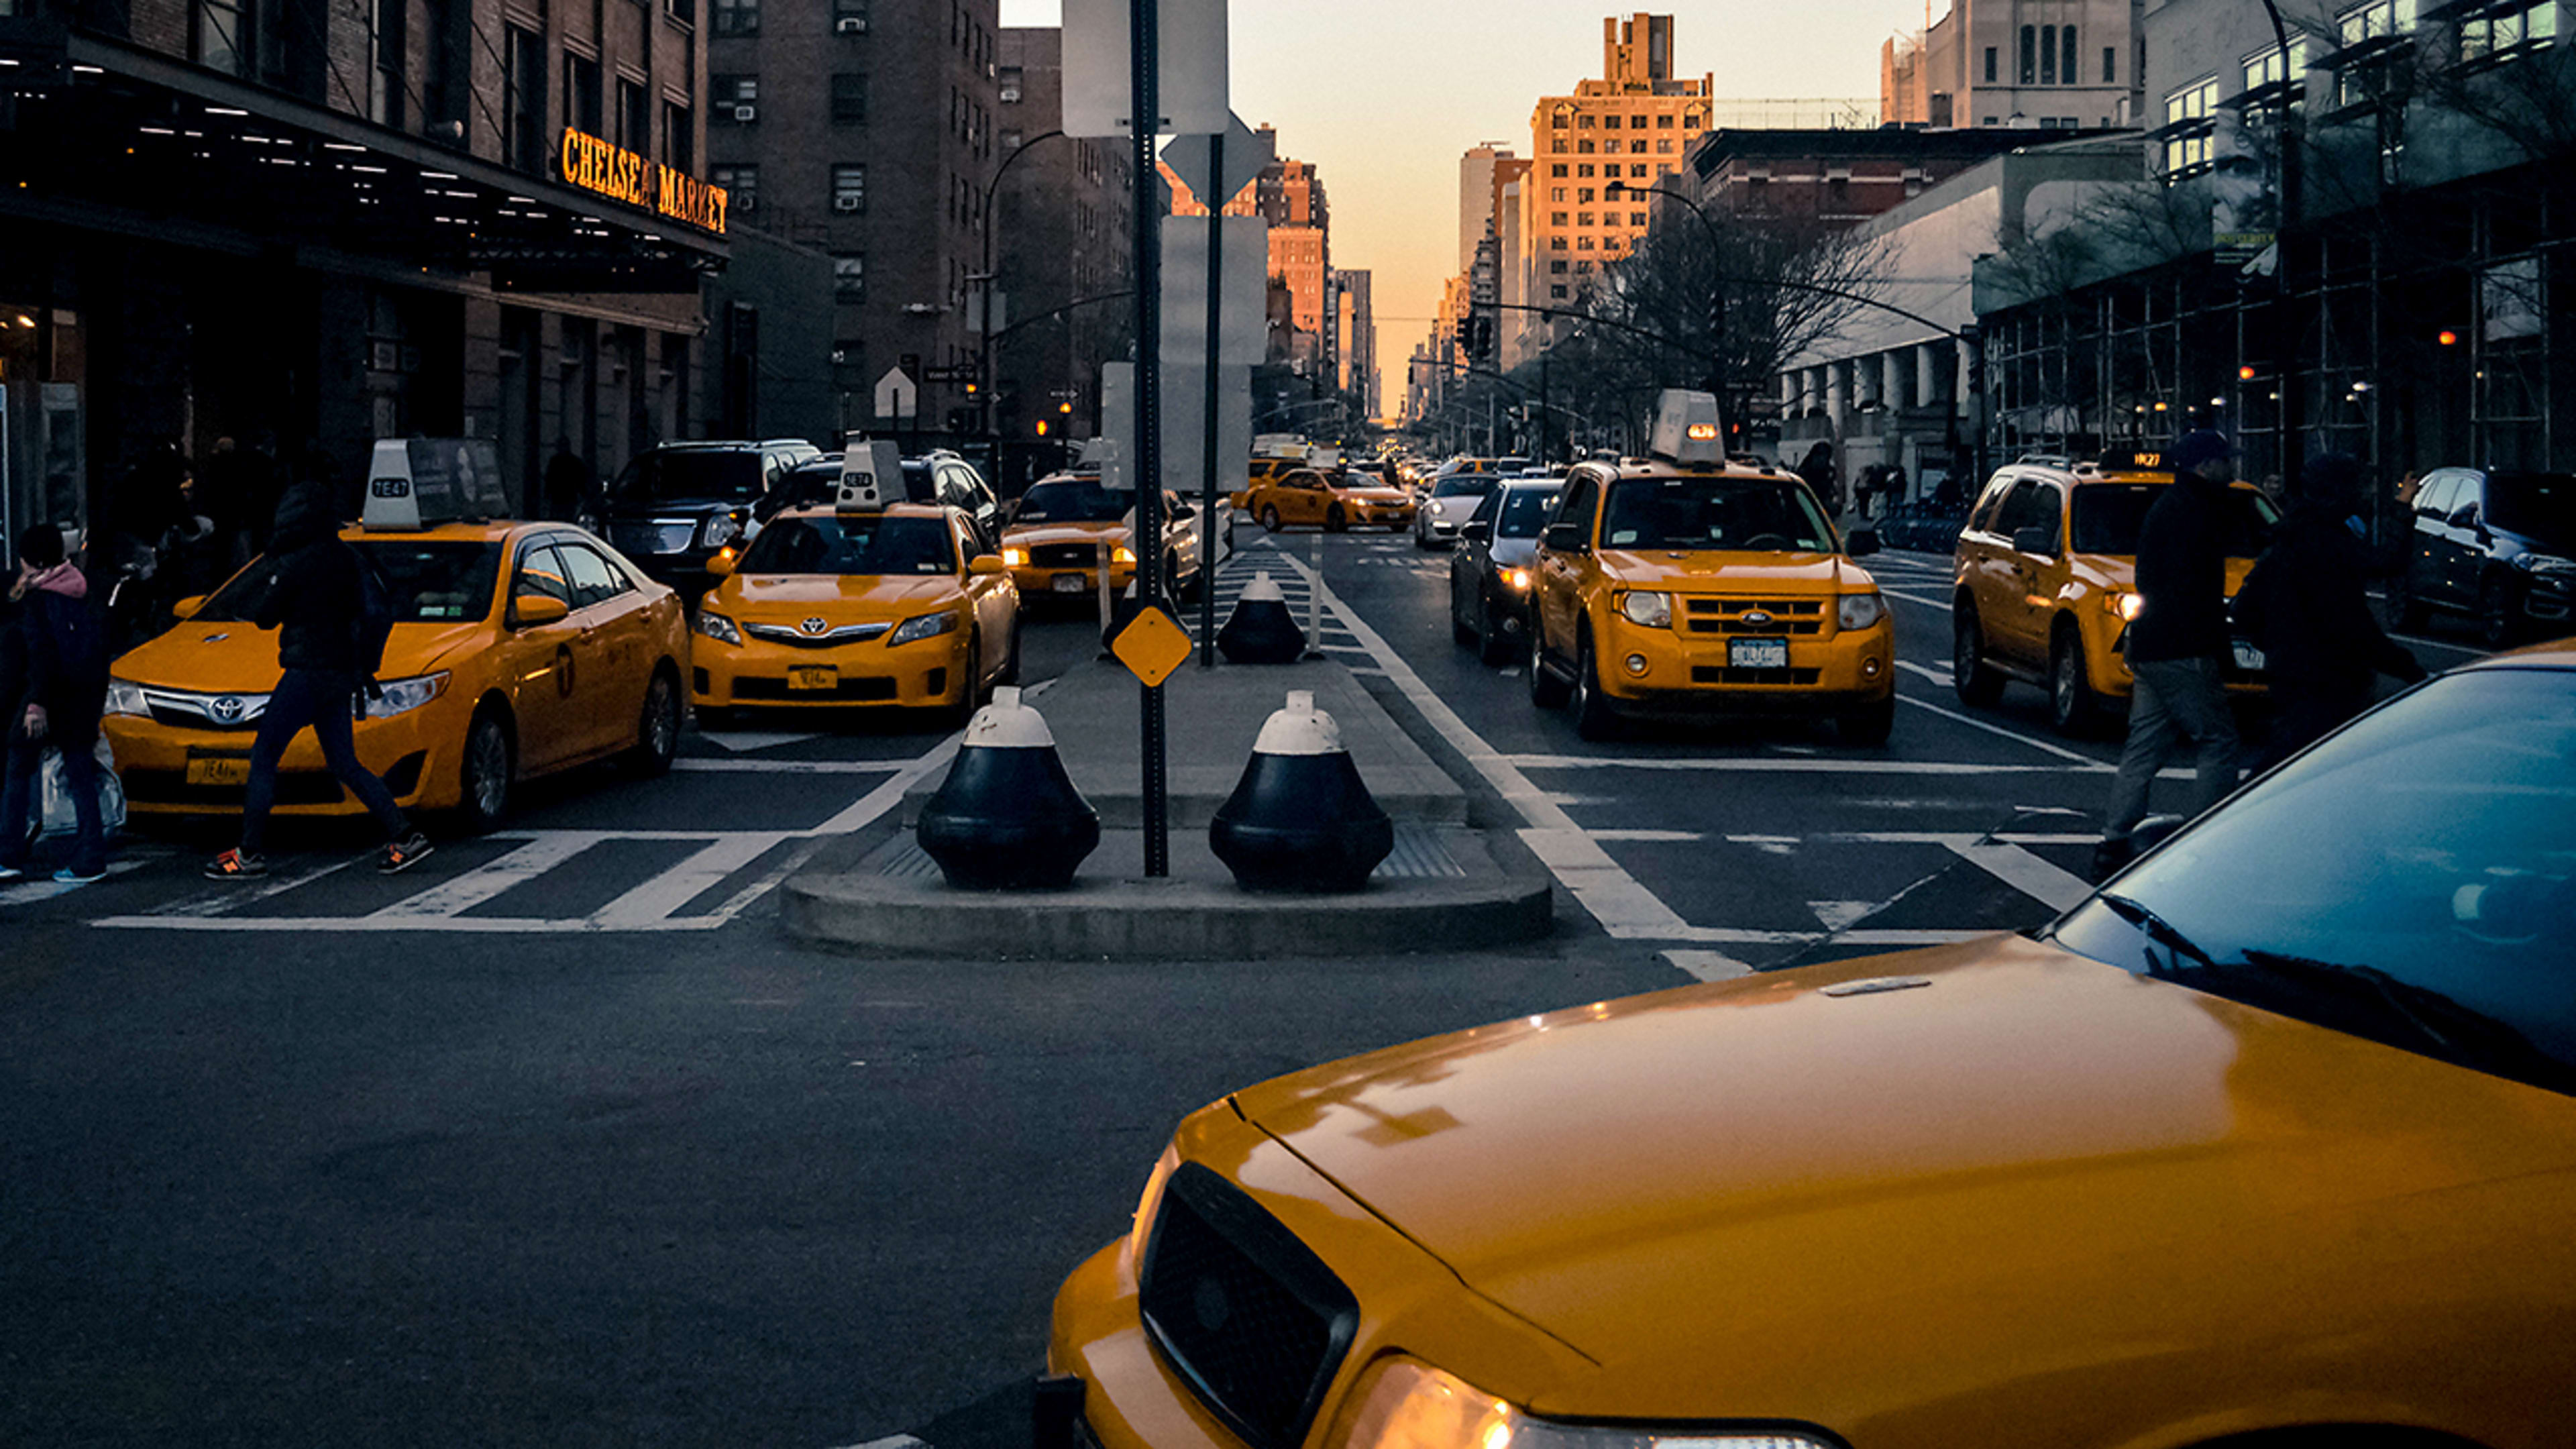 The hidden way cabs could promote healthier cities